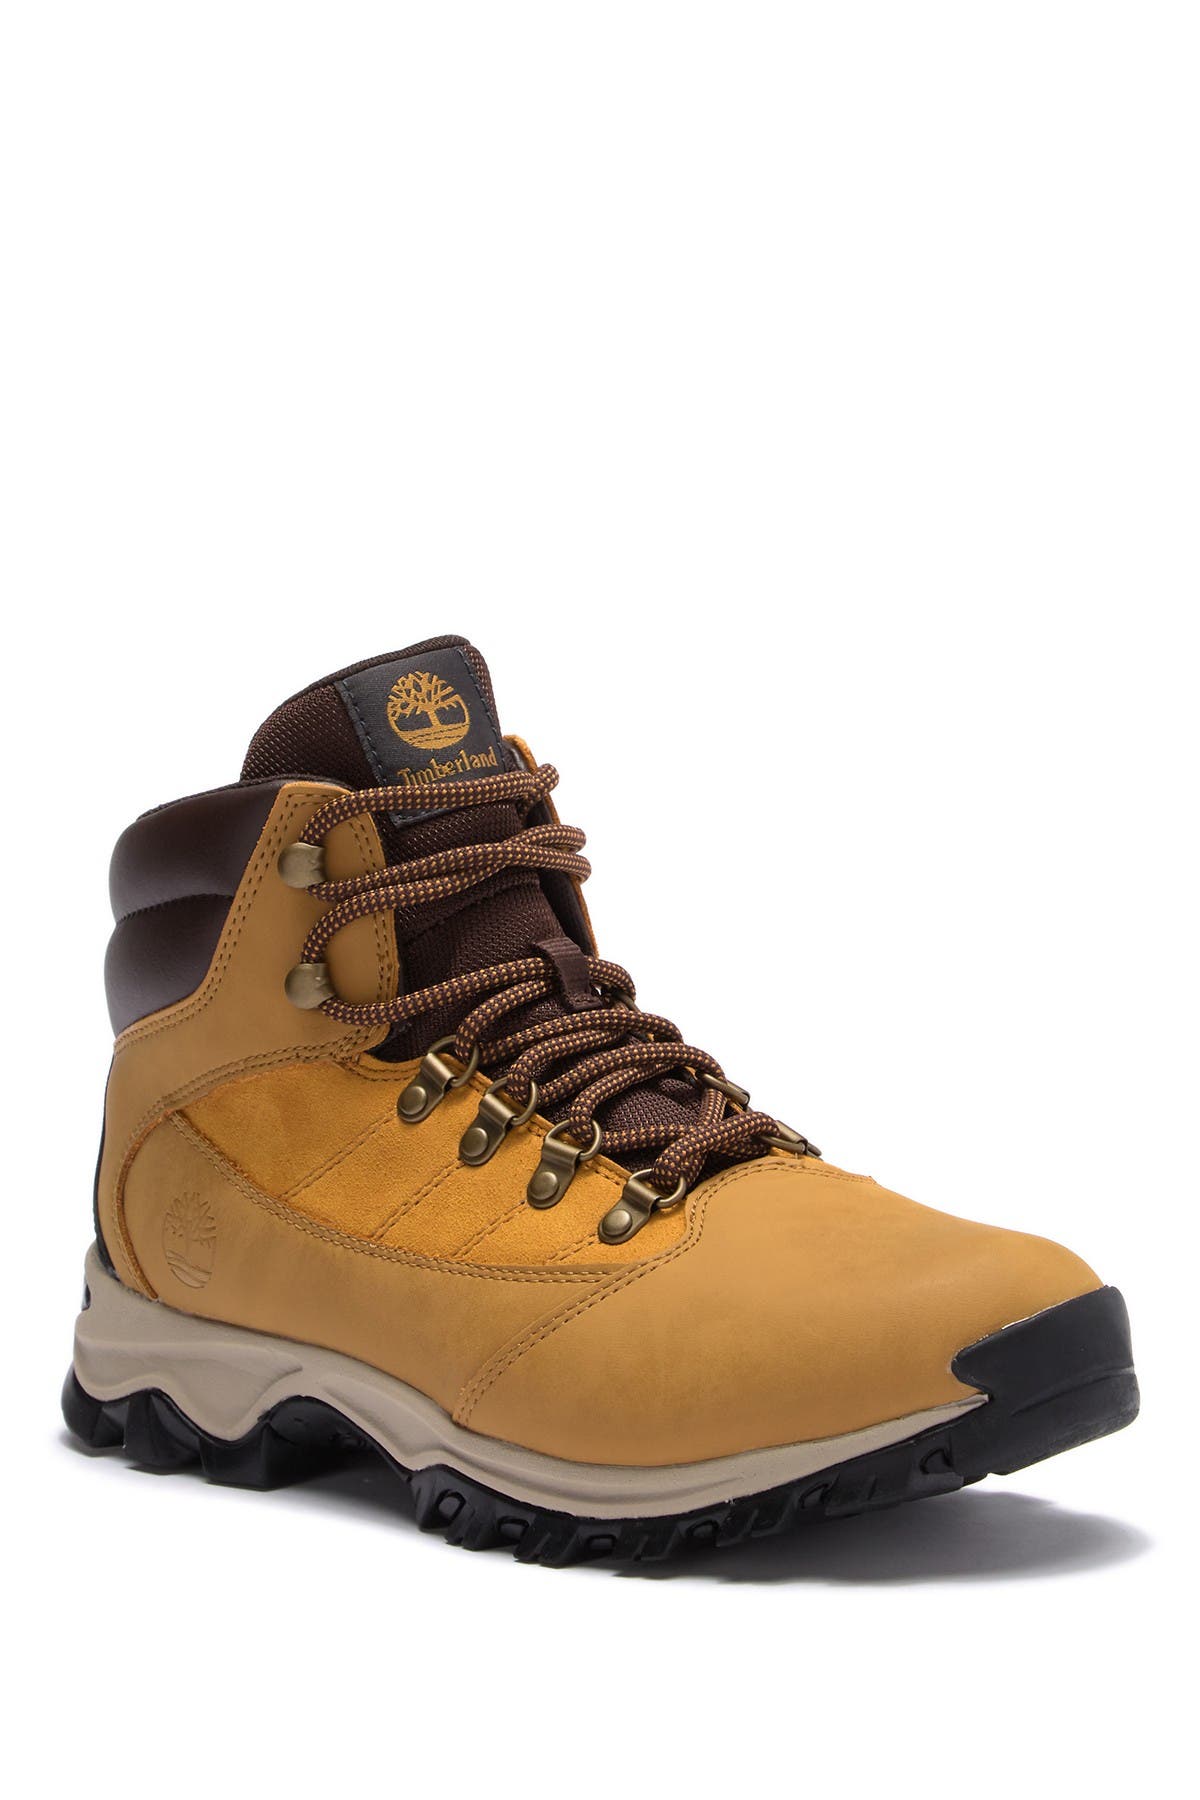 timberland rangeley review